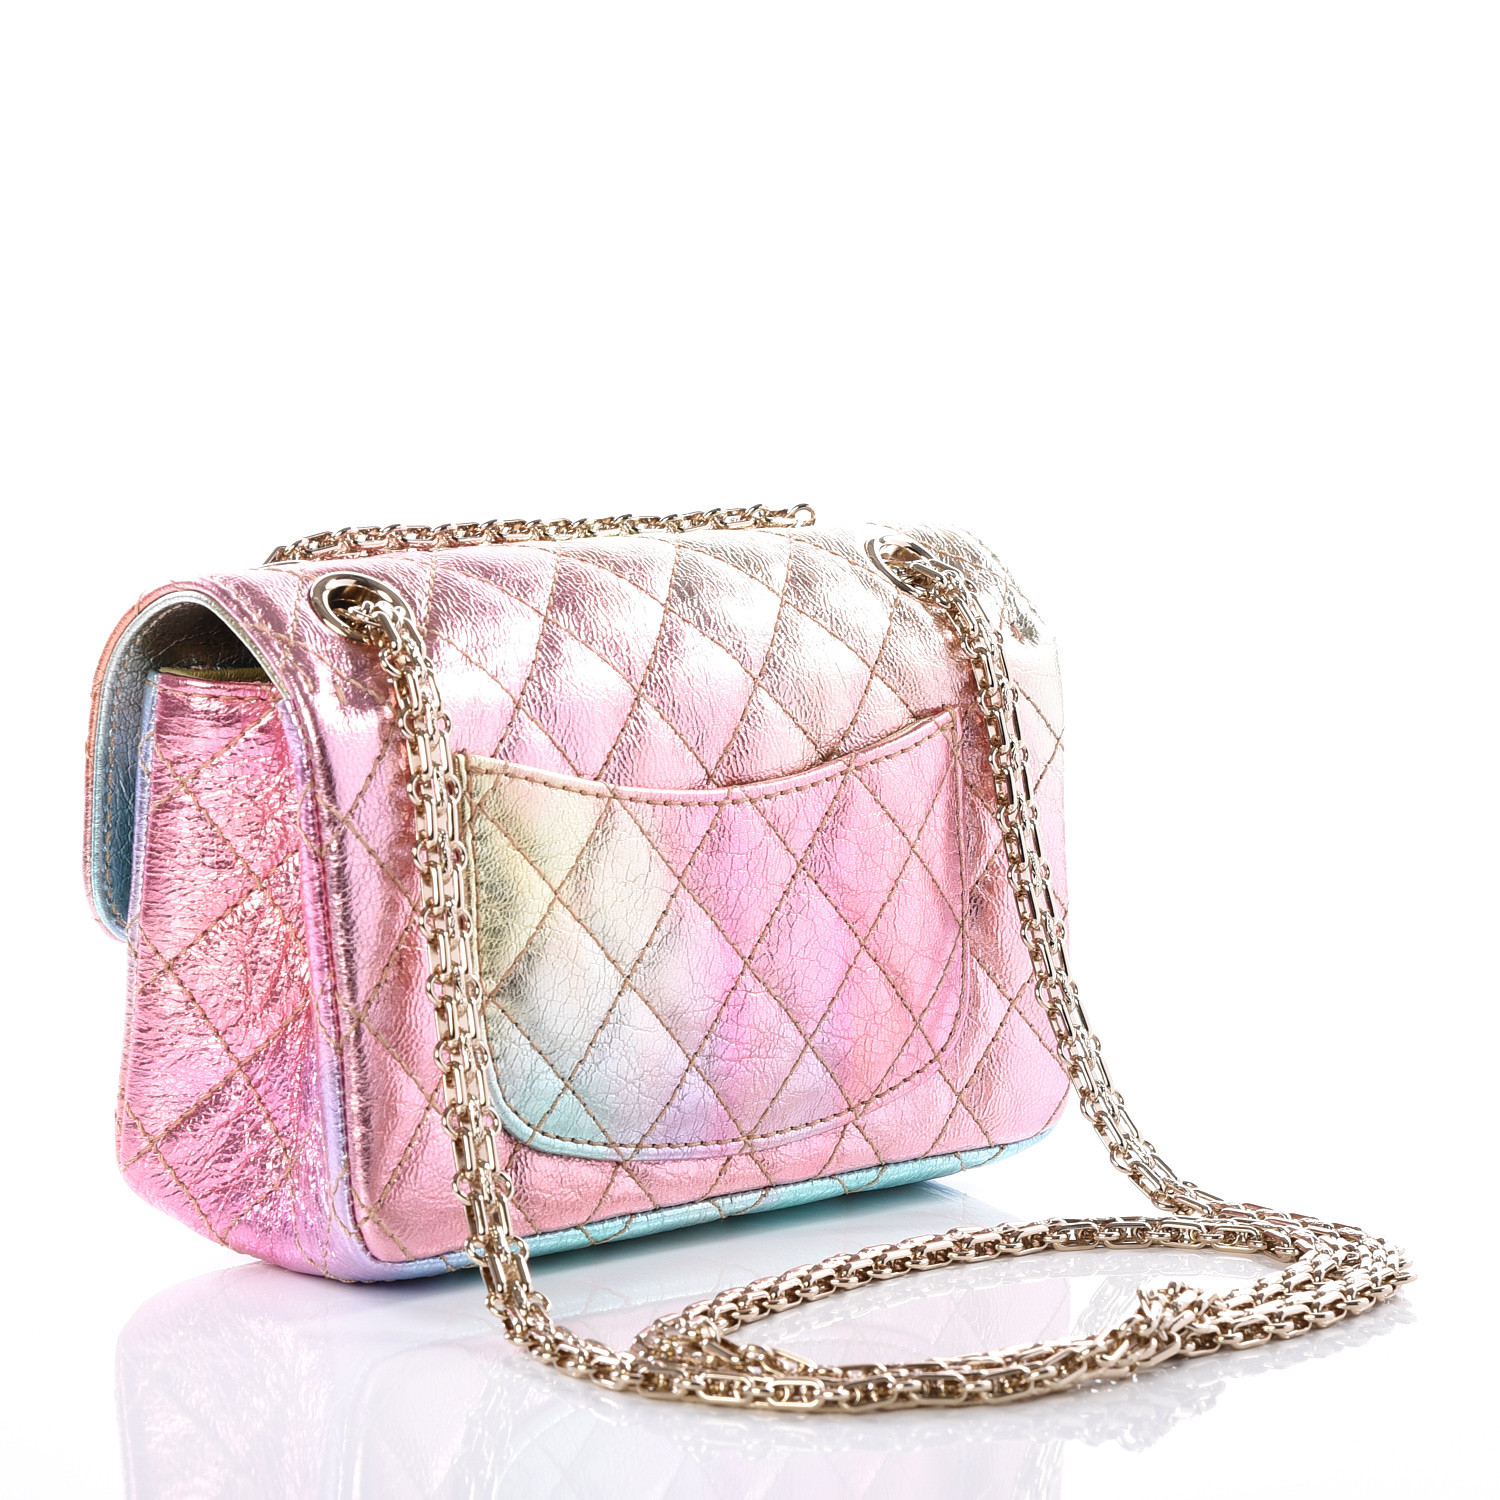 CHANEL Metallic Goatskin Quilted Mini 2.55 Reissue Flap Multicolor 540401